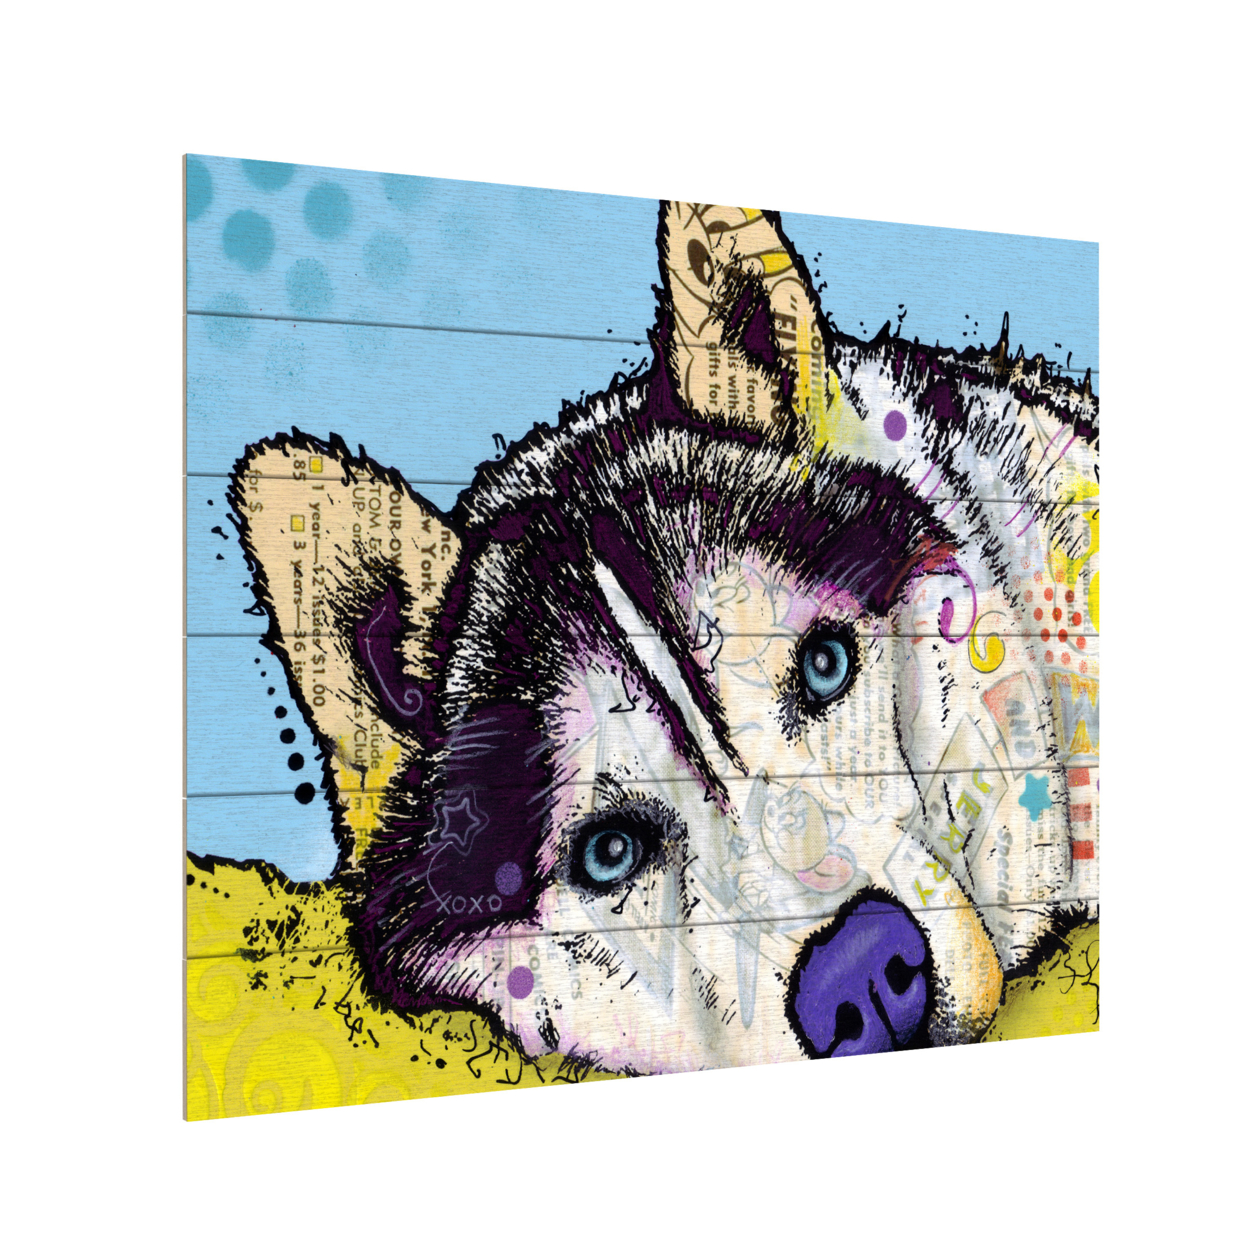 Wooden Slat Art 18 X 22 Inches Titled Siberian Husky II Ready To Hang Home Decor Picture